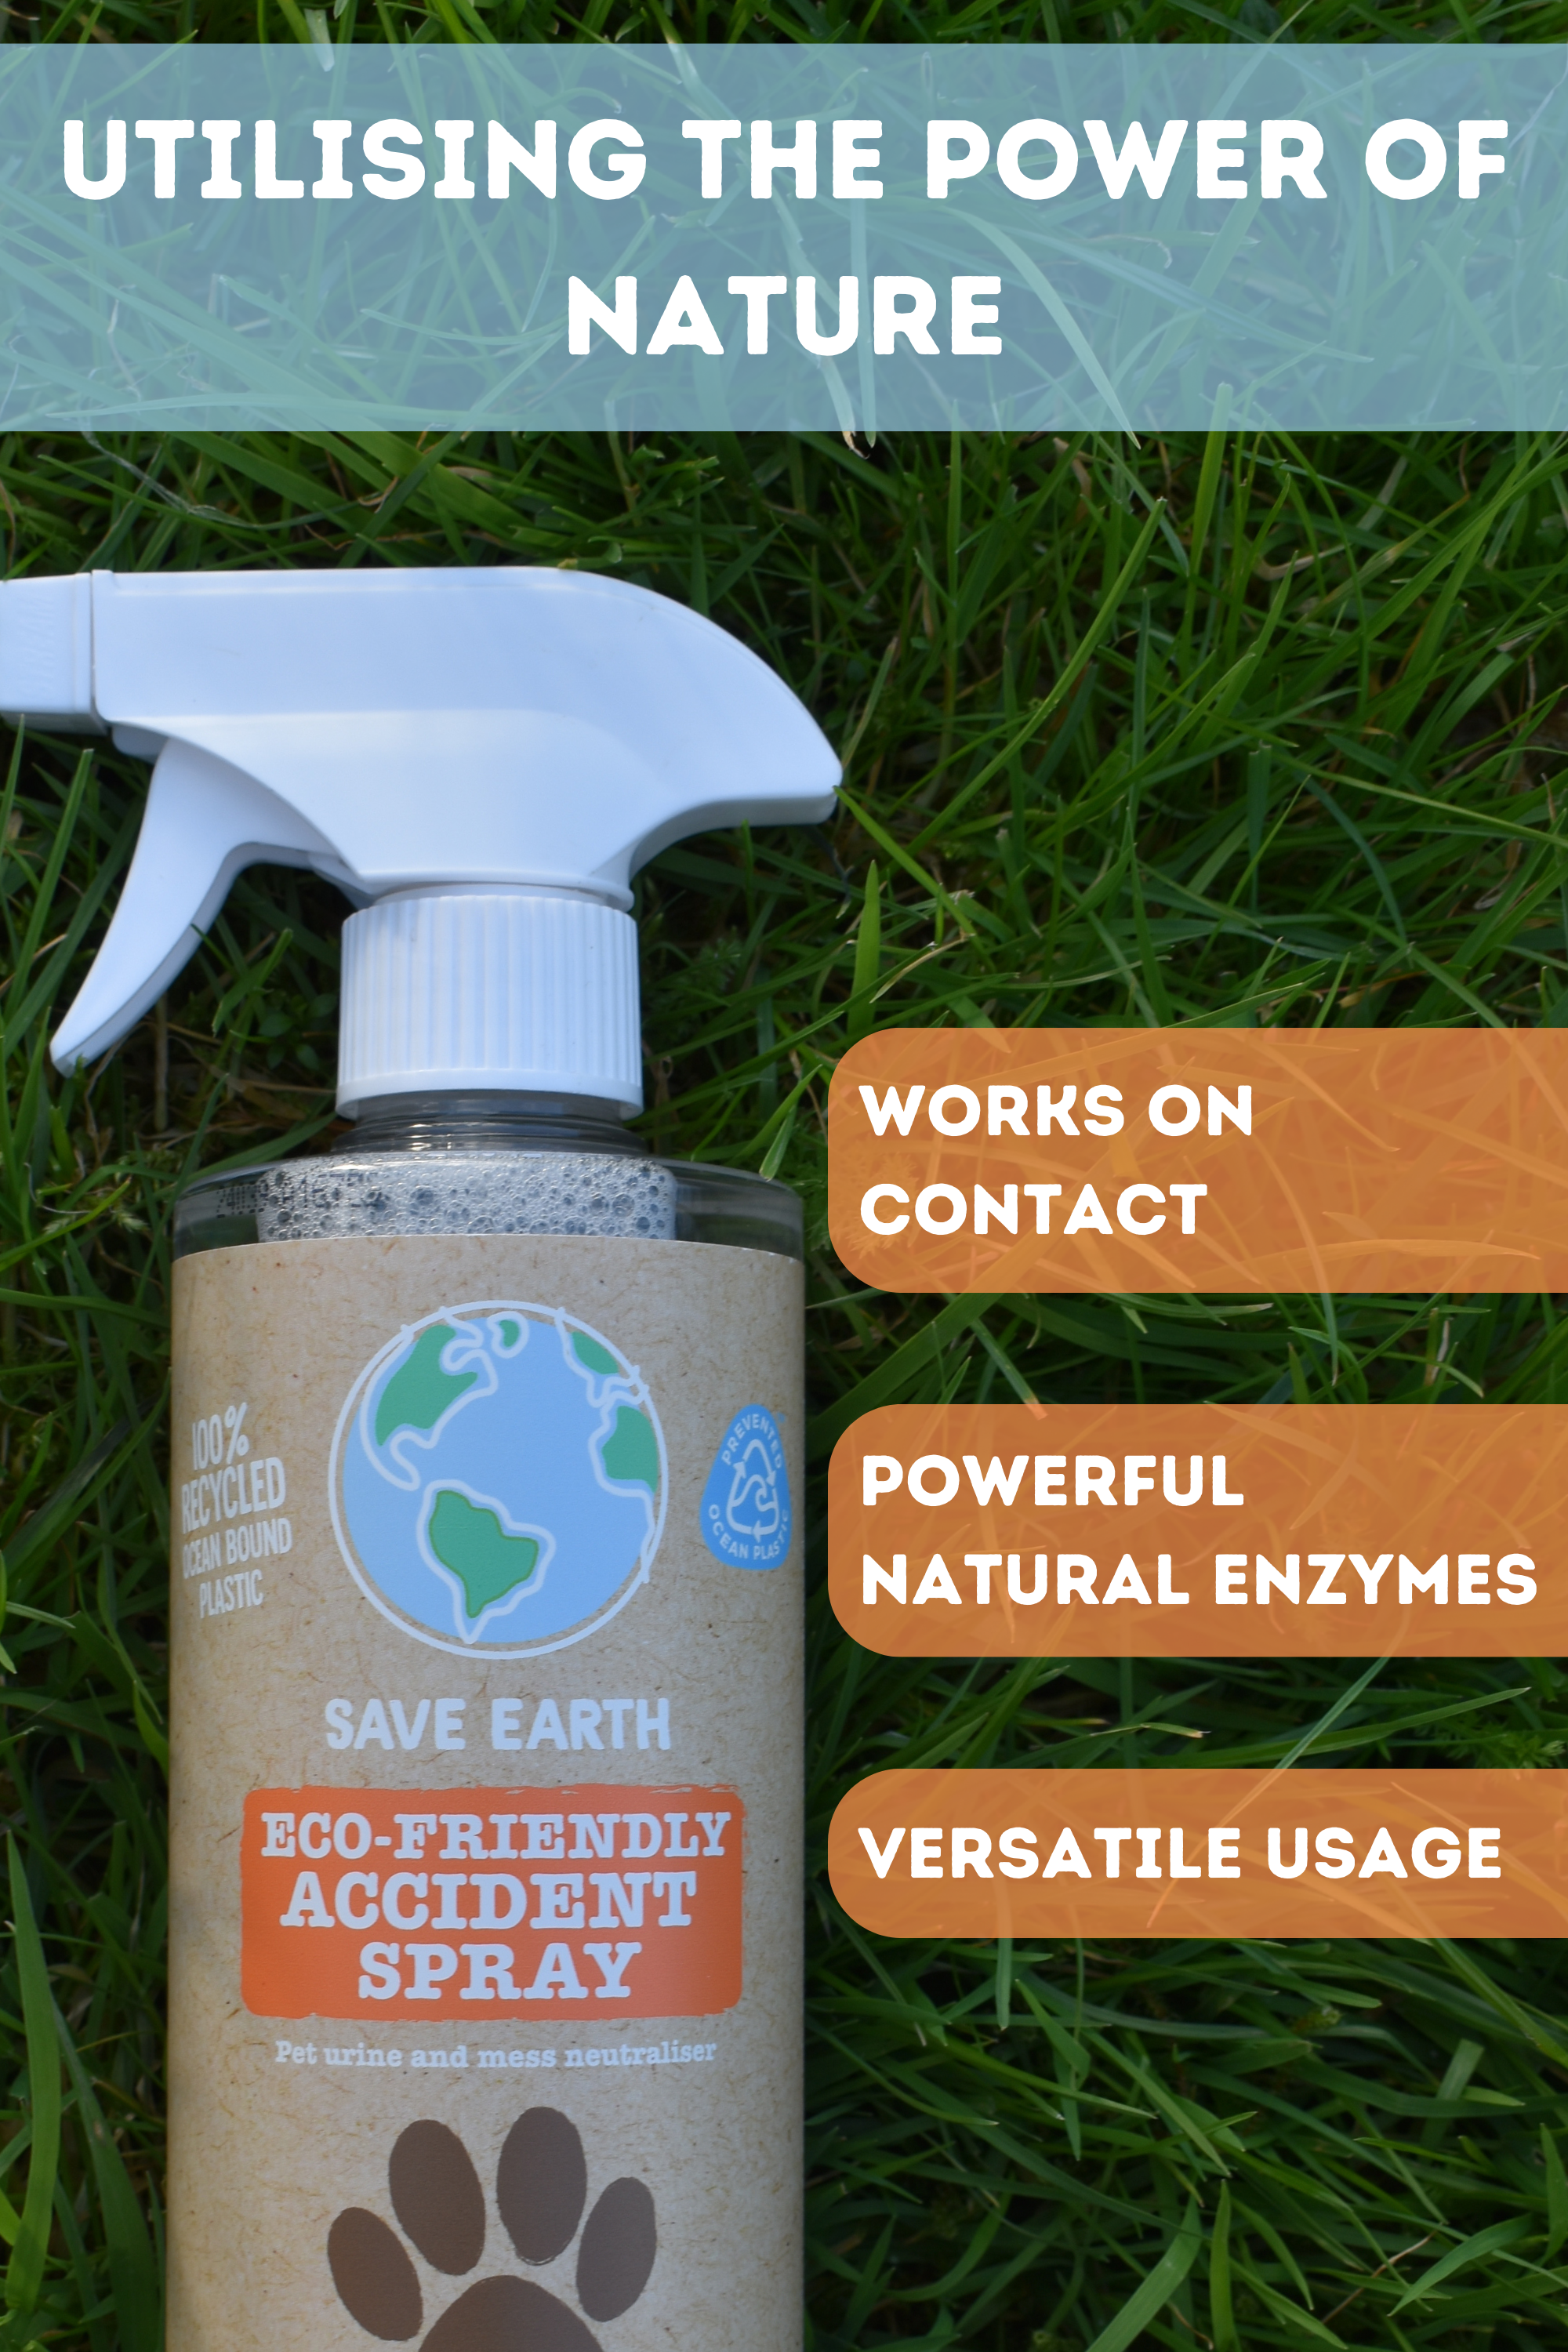 SAVE EARTH Eco-Friendly Accident Spray